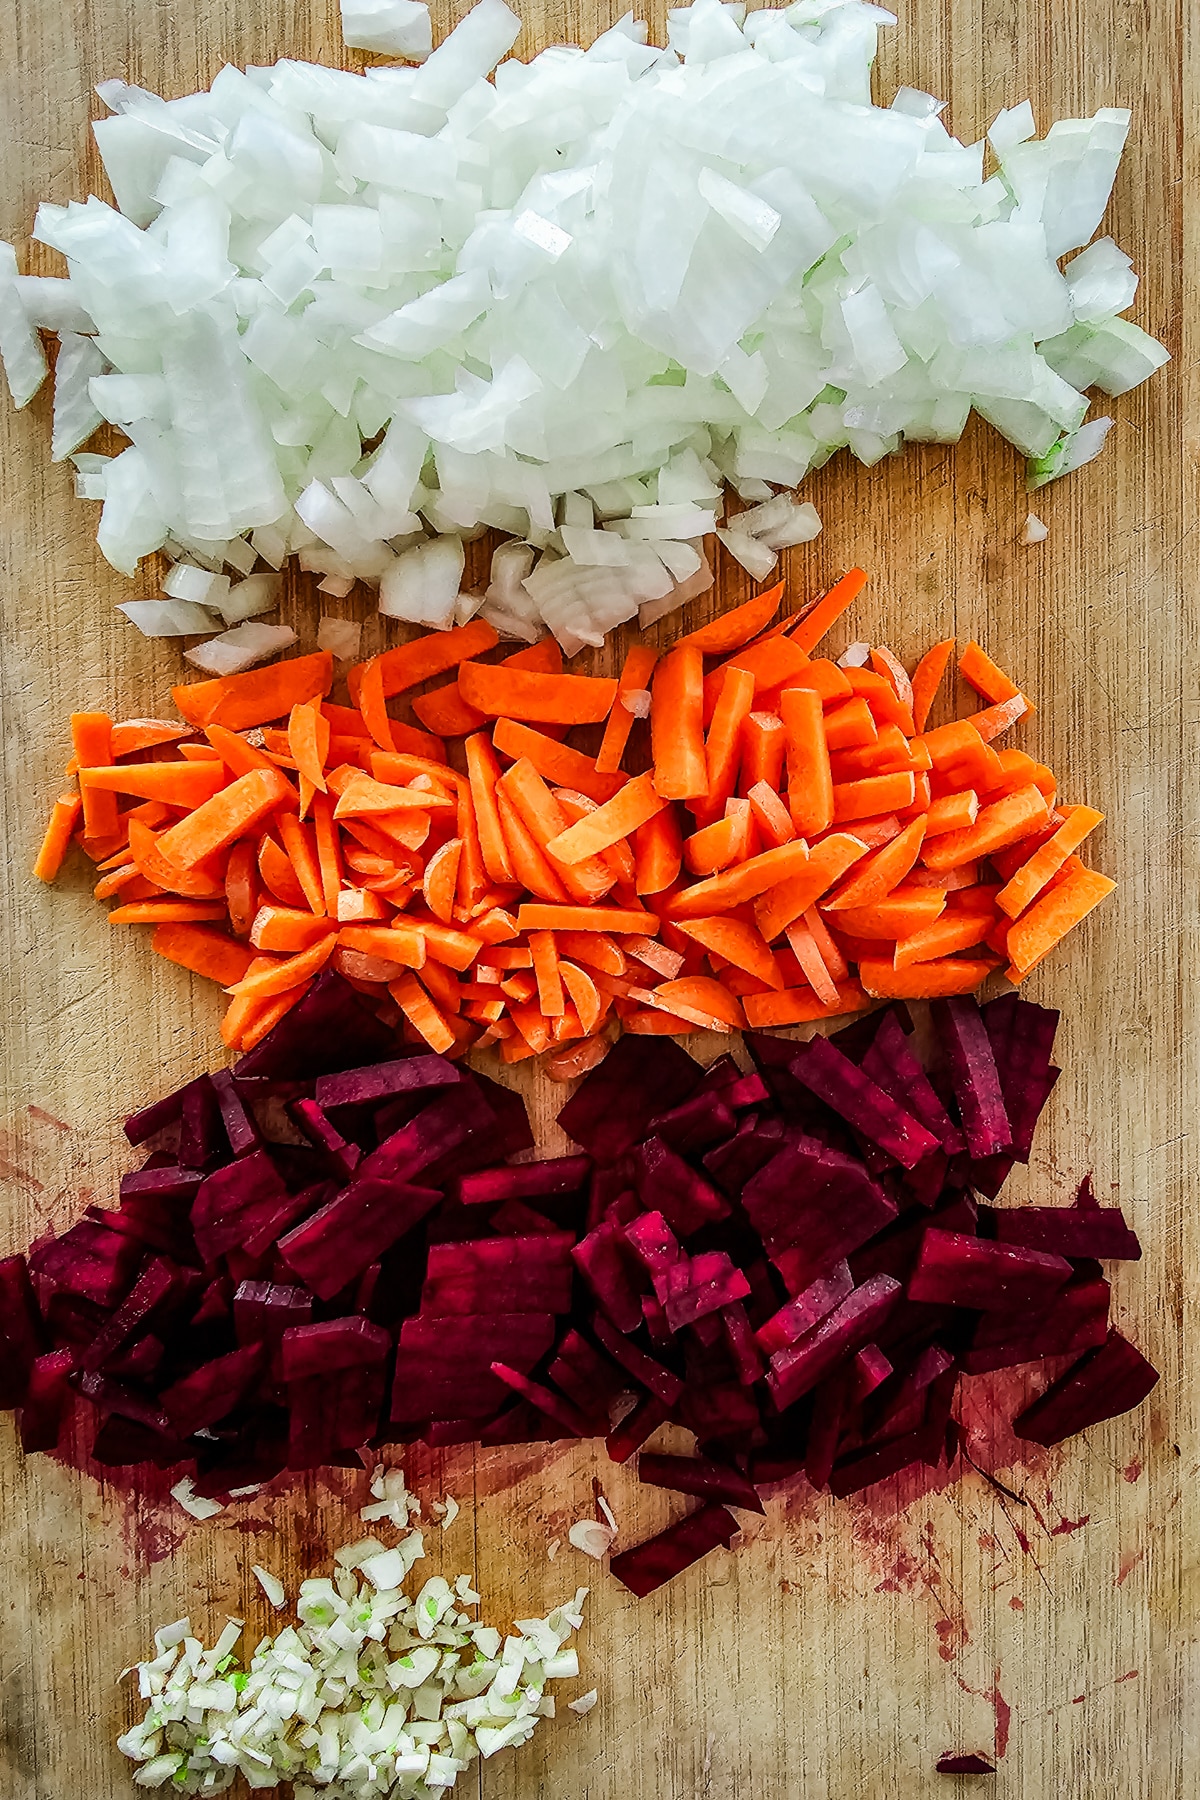 diced onions, cut carrots, beet root, and minced garlic on a wooden cutting board.